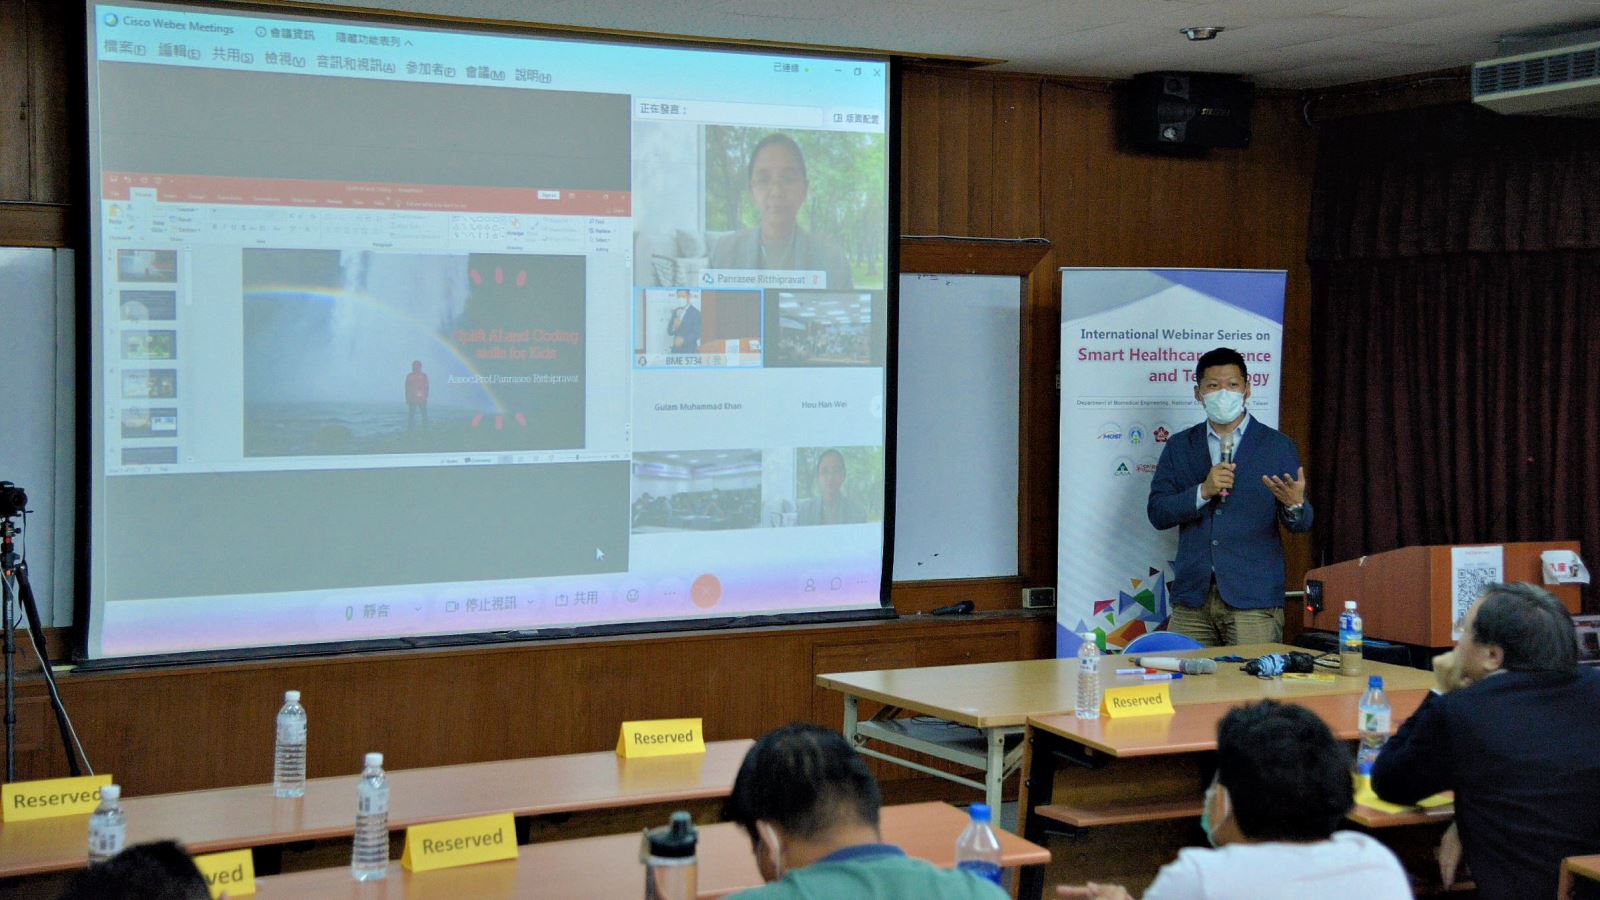 Taiwan-Thailand International Webinar Series on Smart Healthcare Science and Technology hosted by Assistant Professor Ting-Yuan Tu